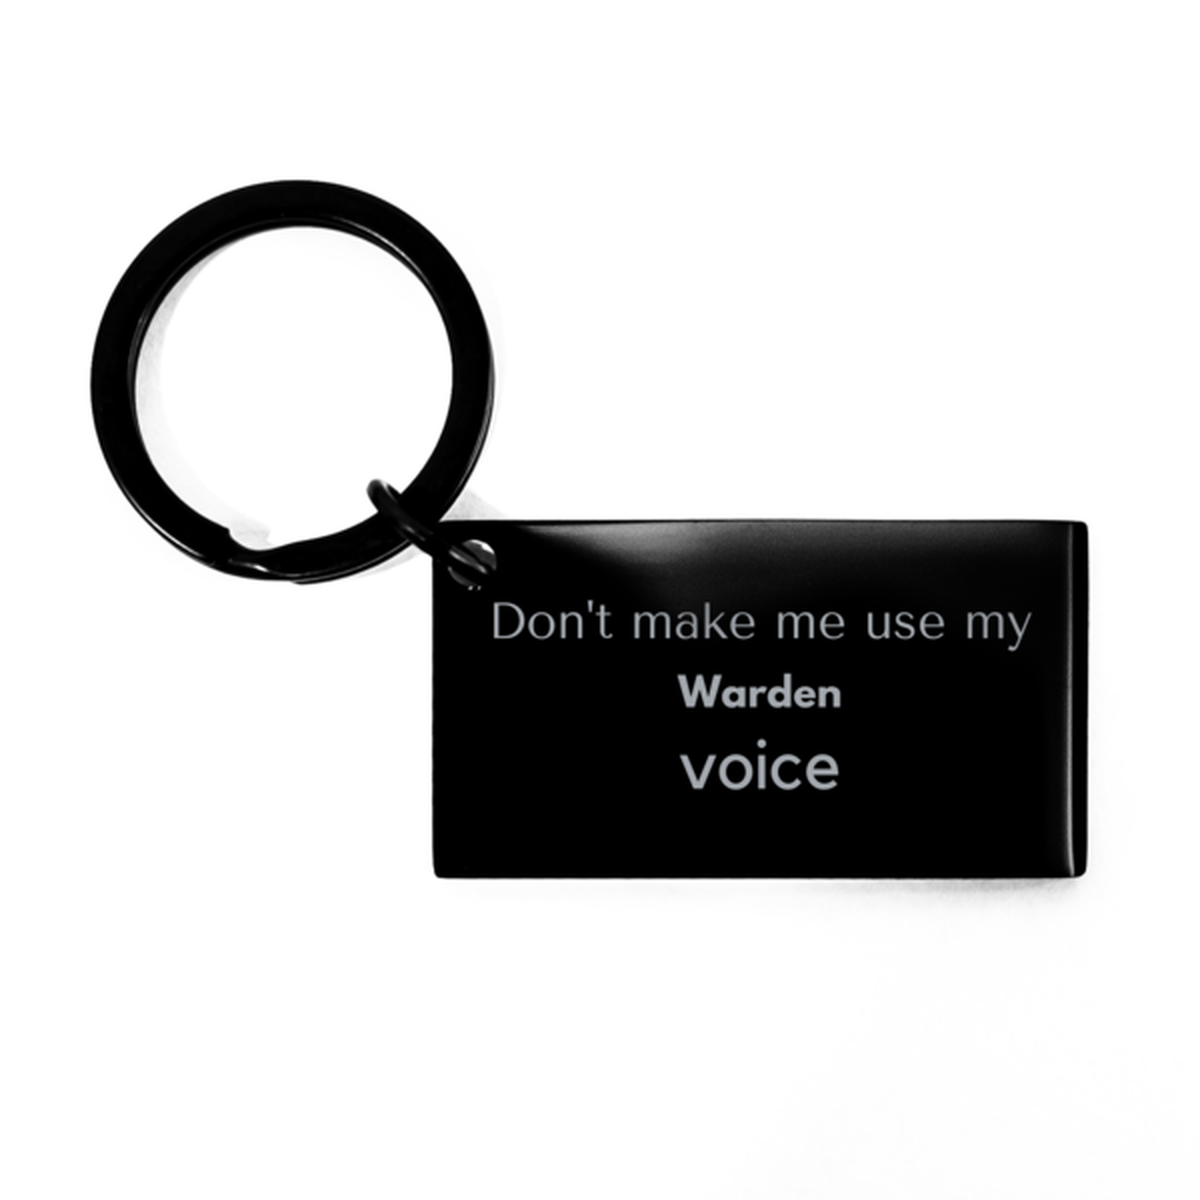 Don't make me use my Warden voice, Sarcasm Warden Gifts, Christmas Warden Keychain Birthday Unique Gifts For Warden Coworkers, Men, Women, Colleague, Friends